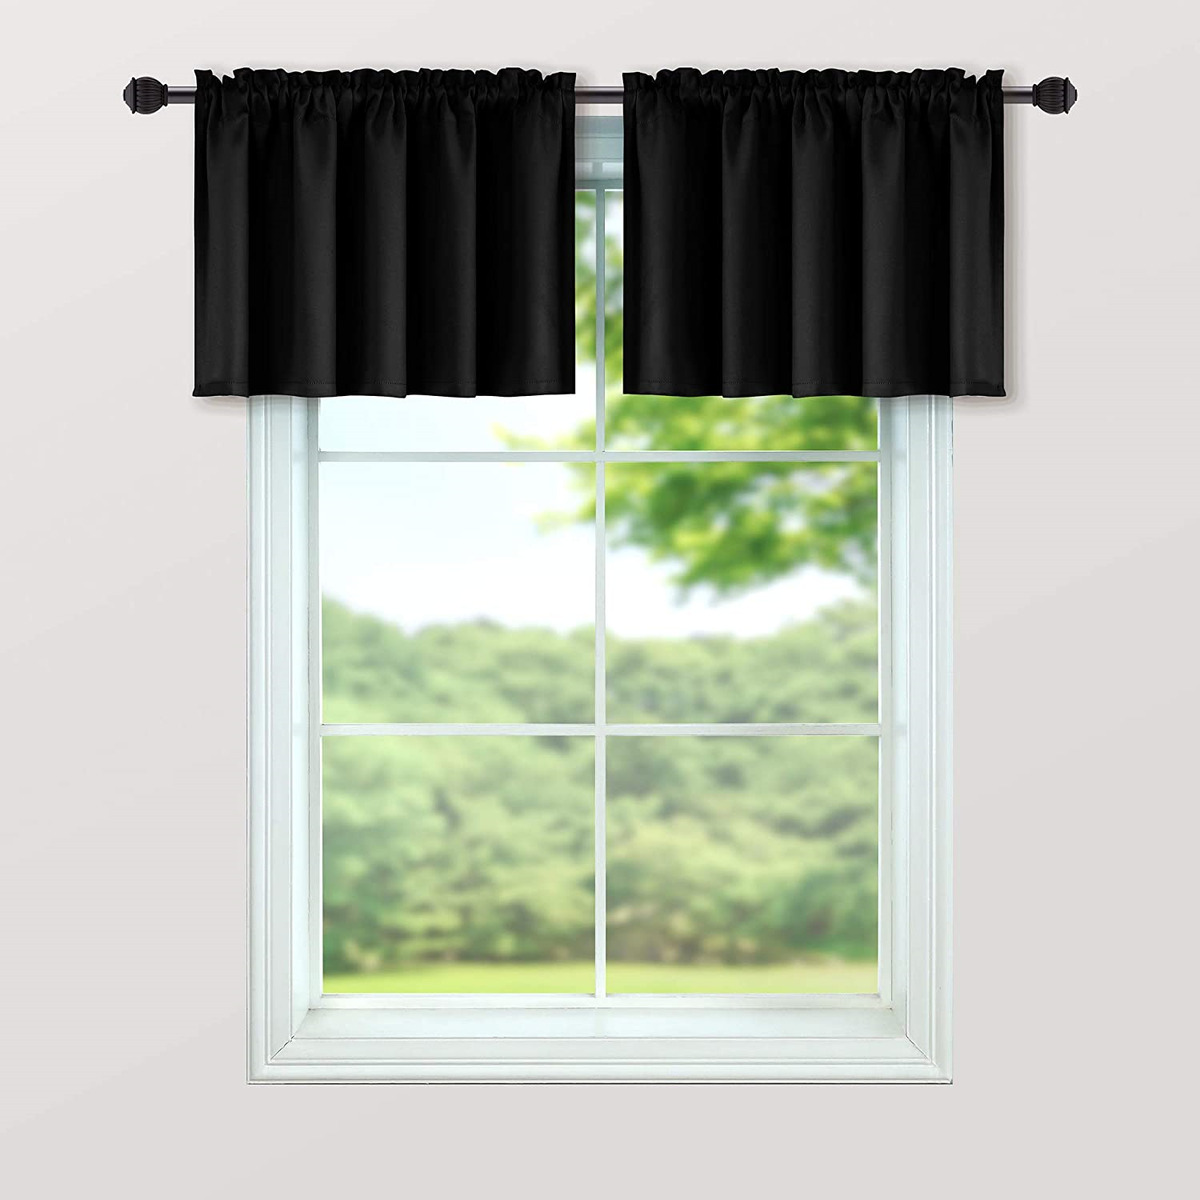 13 Incredible Black Valances For Windows For 2023 1697514335 